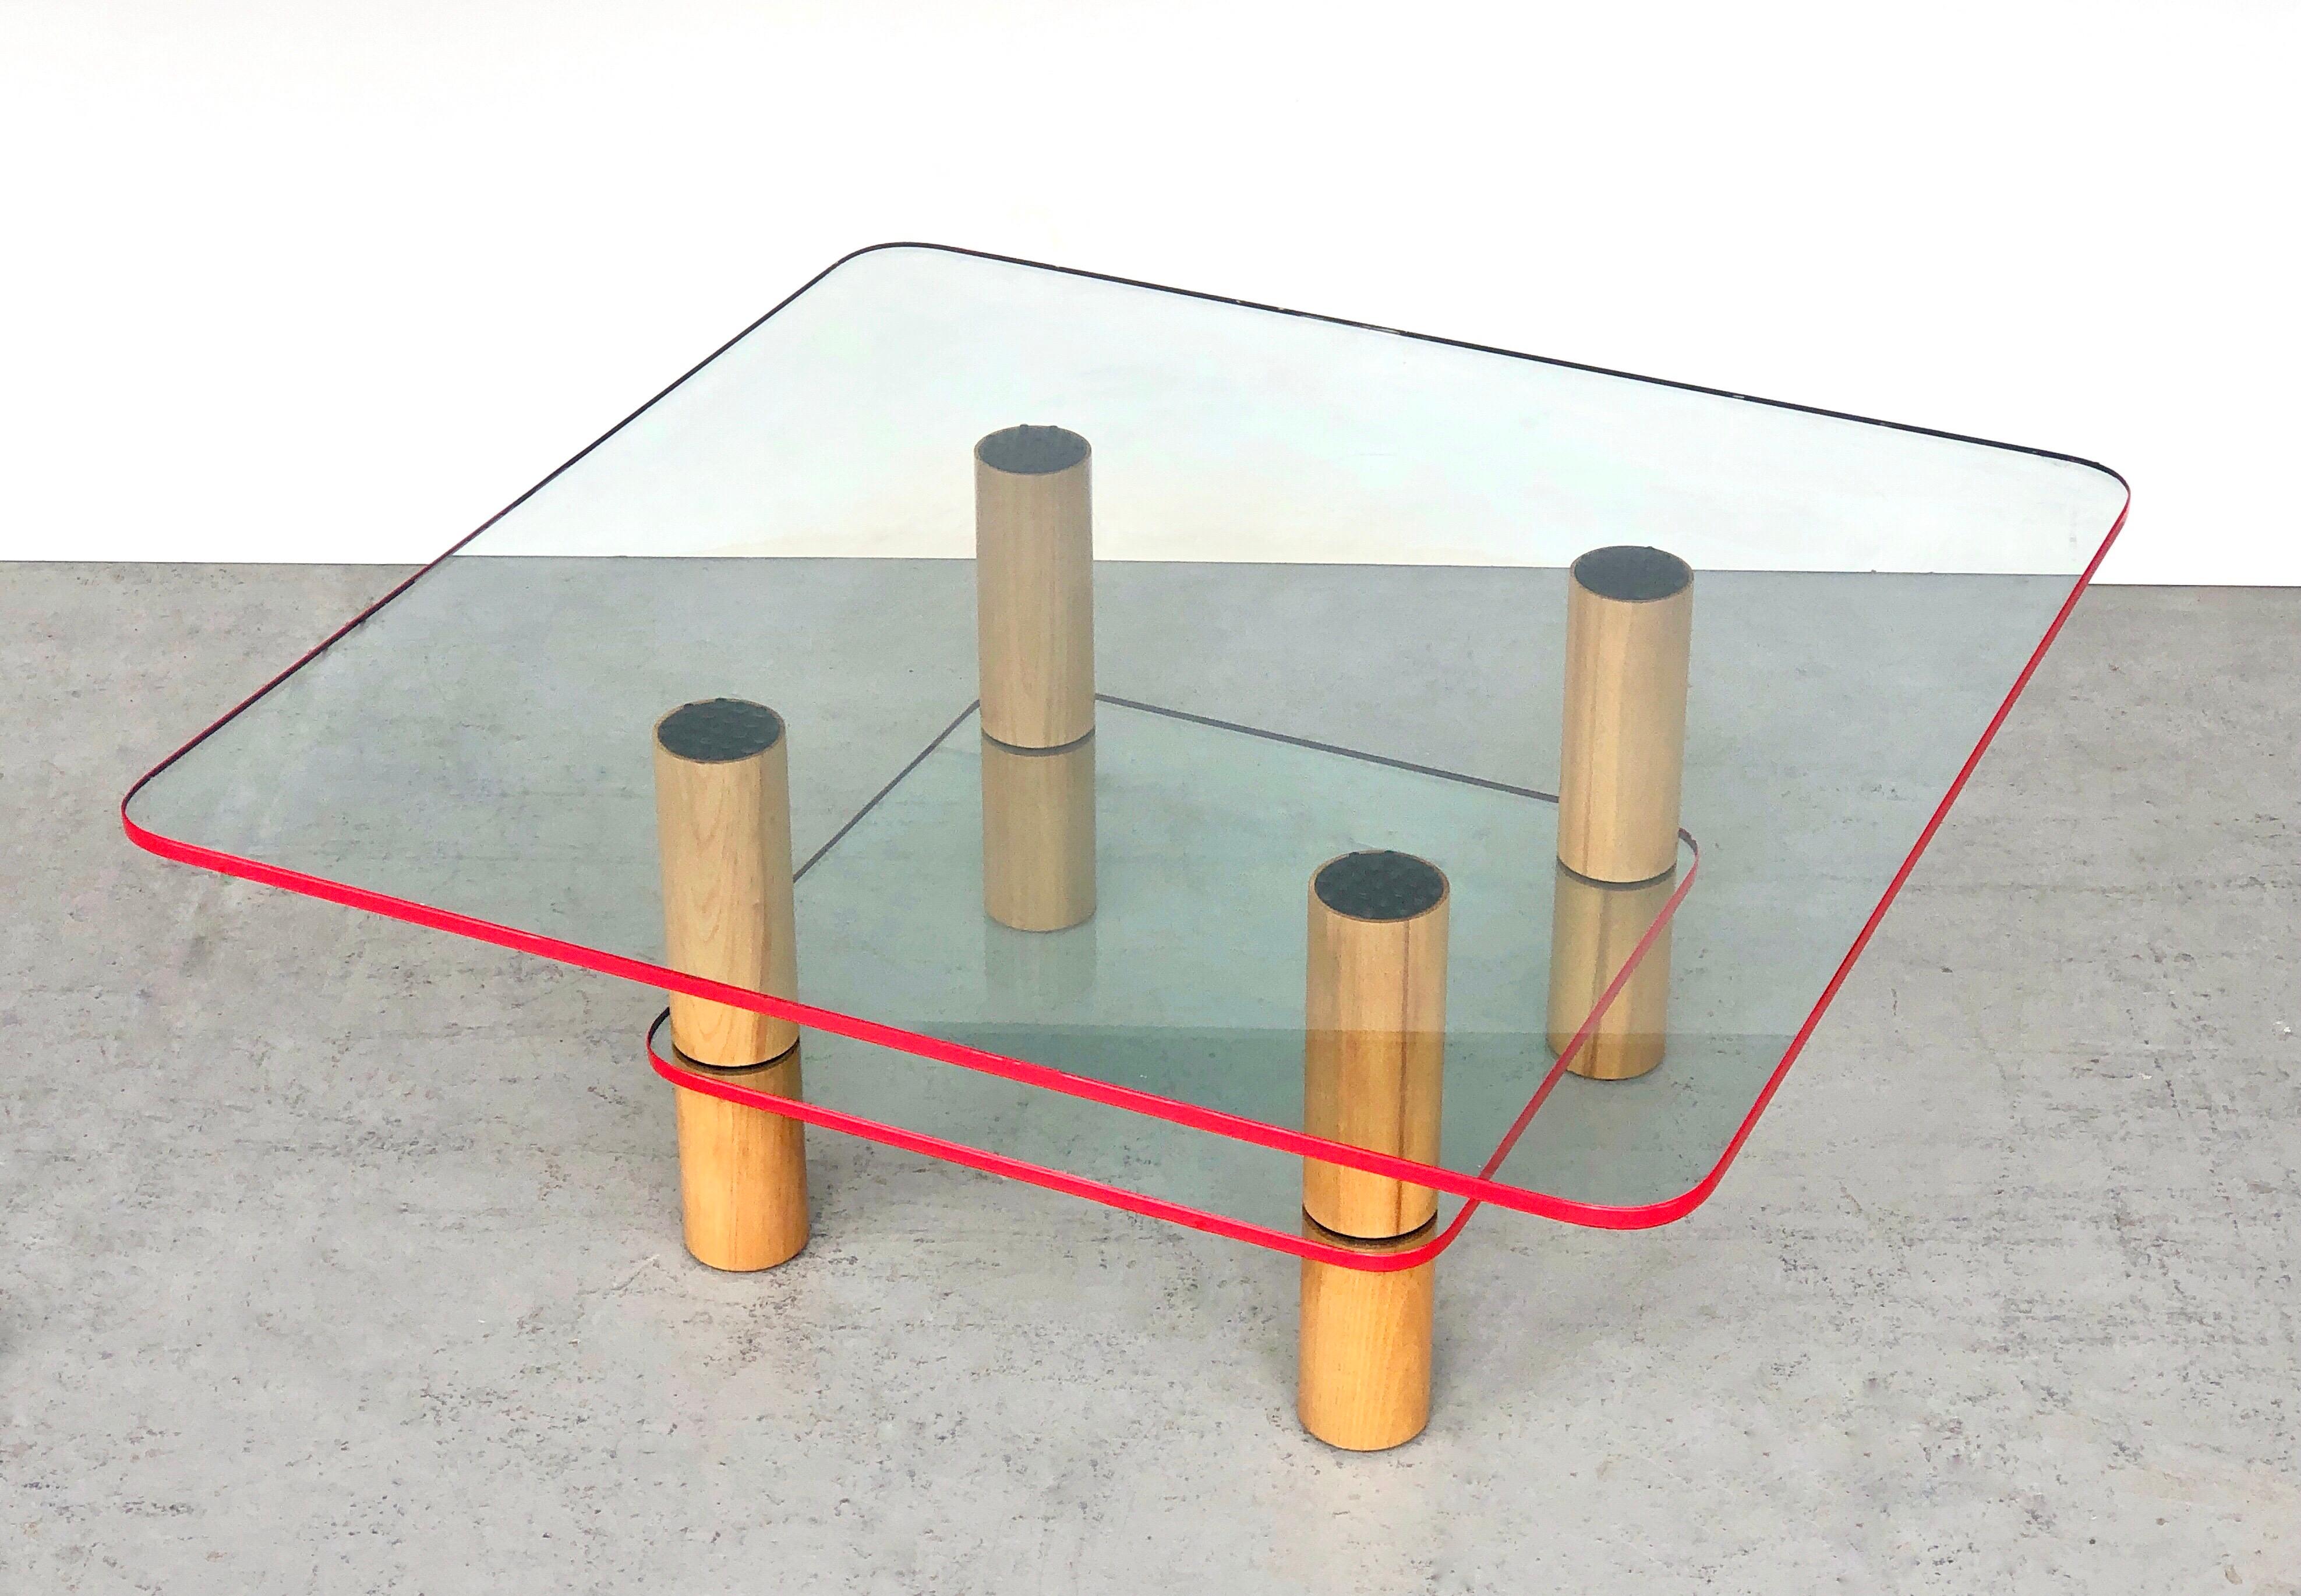 A very chic post modern coffee table. 2 glass levels on clean oak columns. The glass pieces have a red enamel edge. Striking post modern design but still visually light. 
Disassembles.